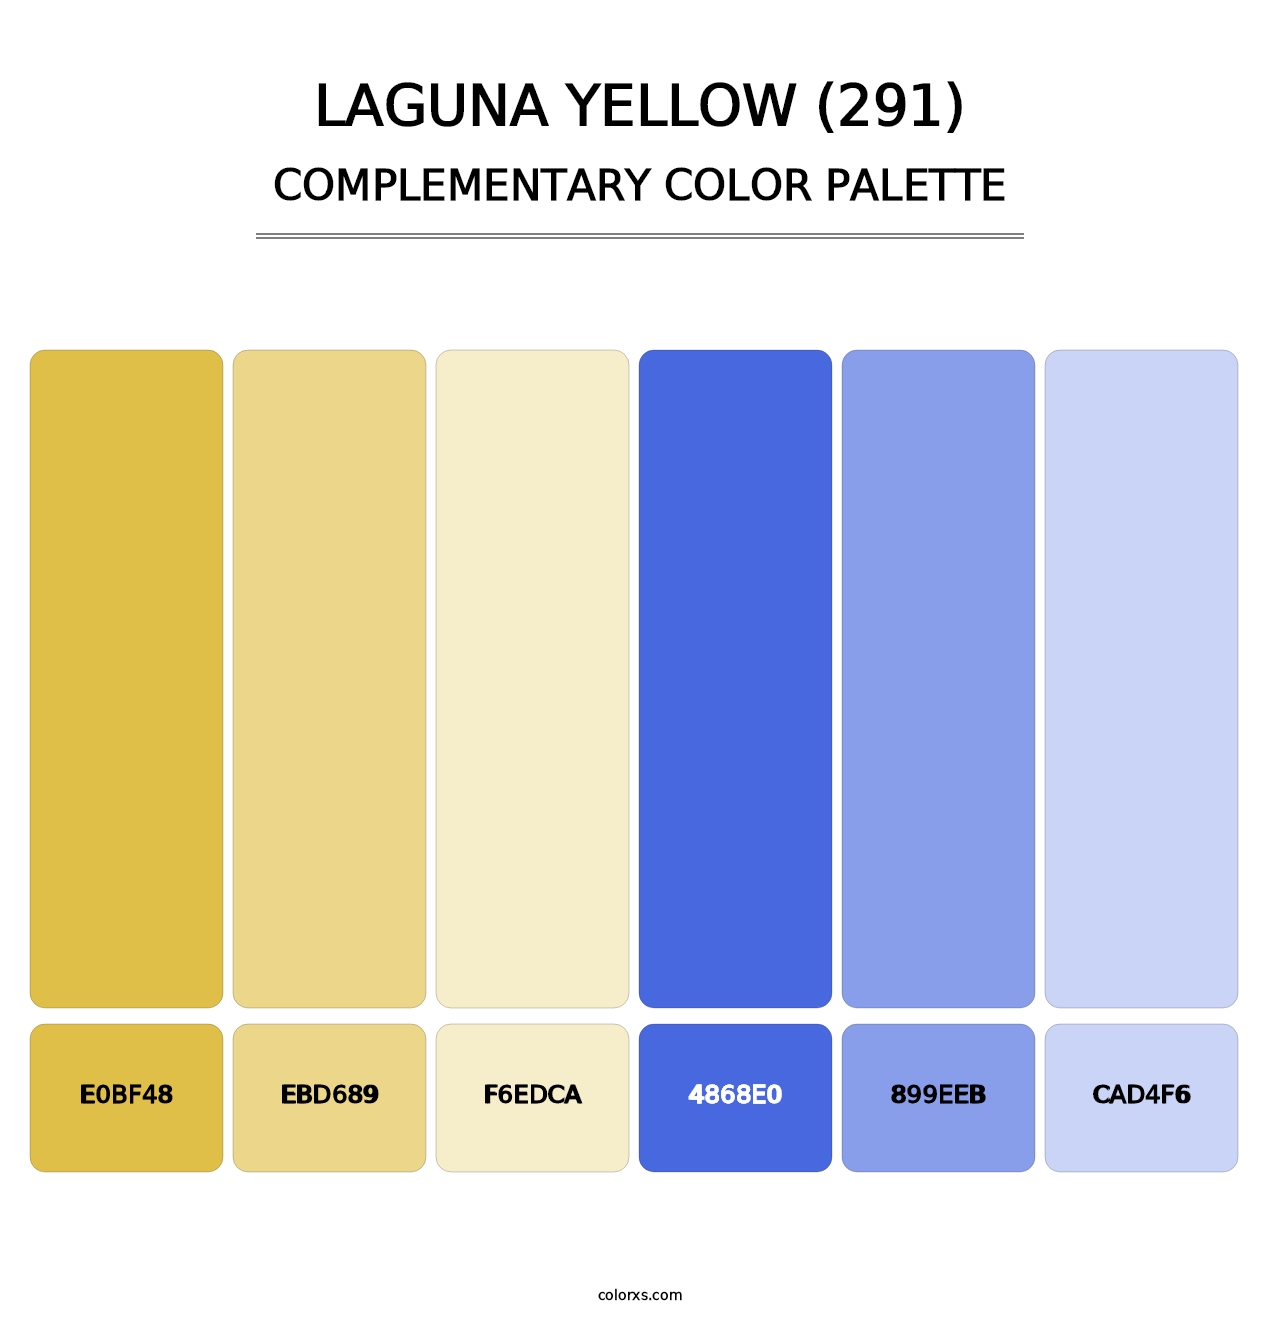 Laguna Yellow (291) - Complementary Color Palette